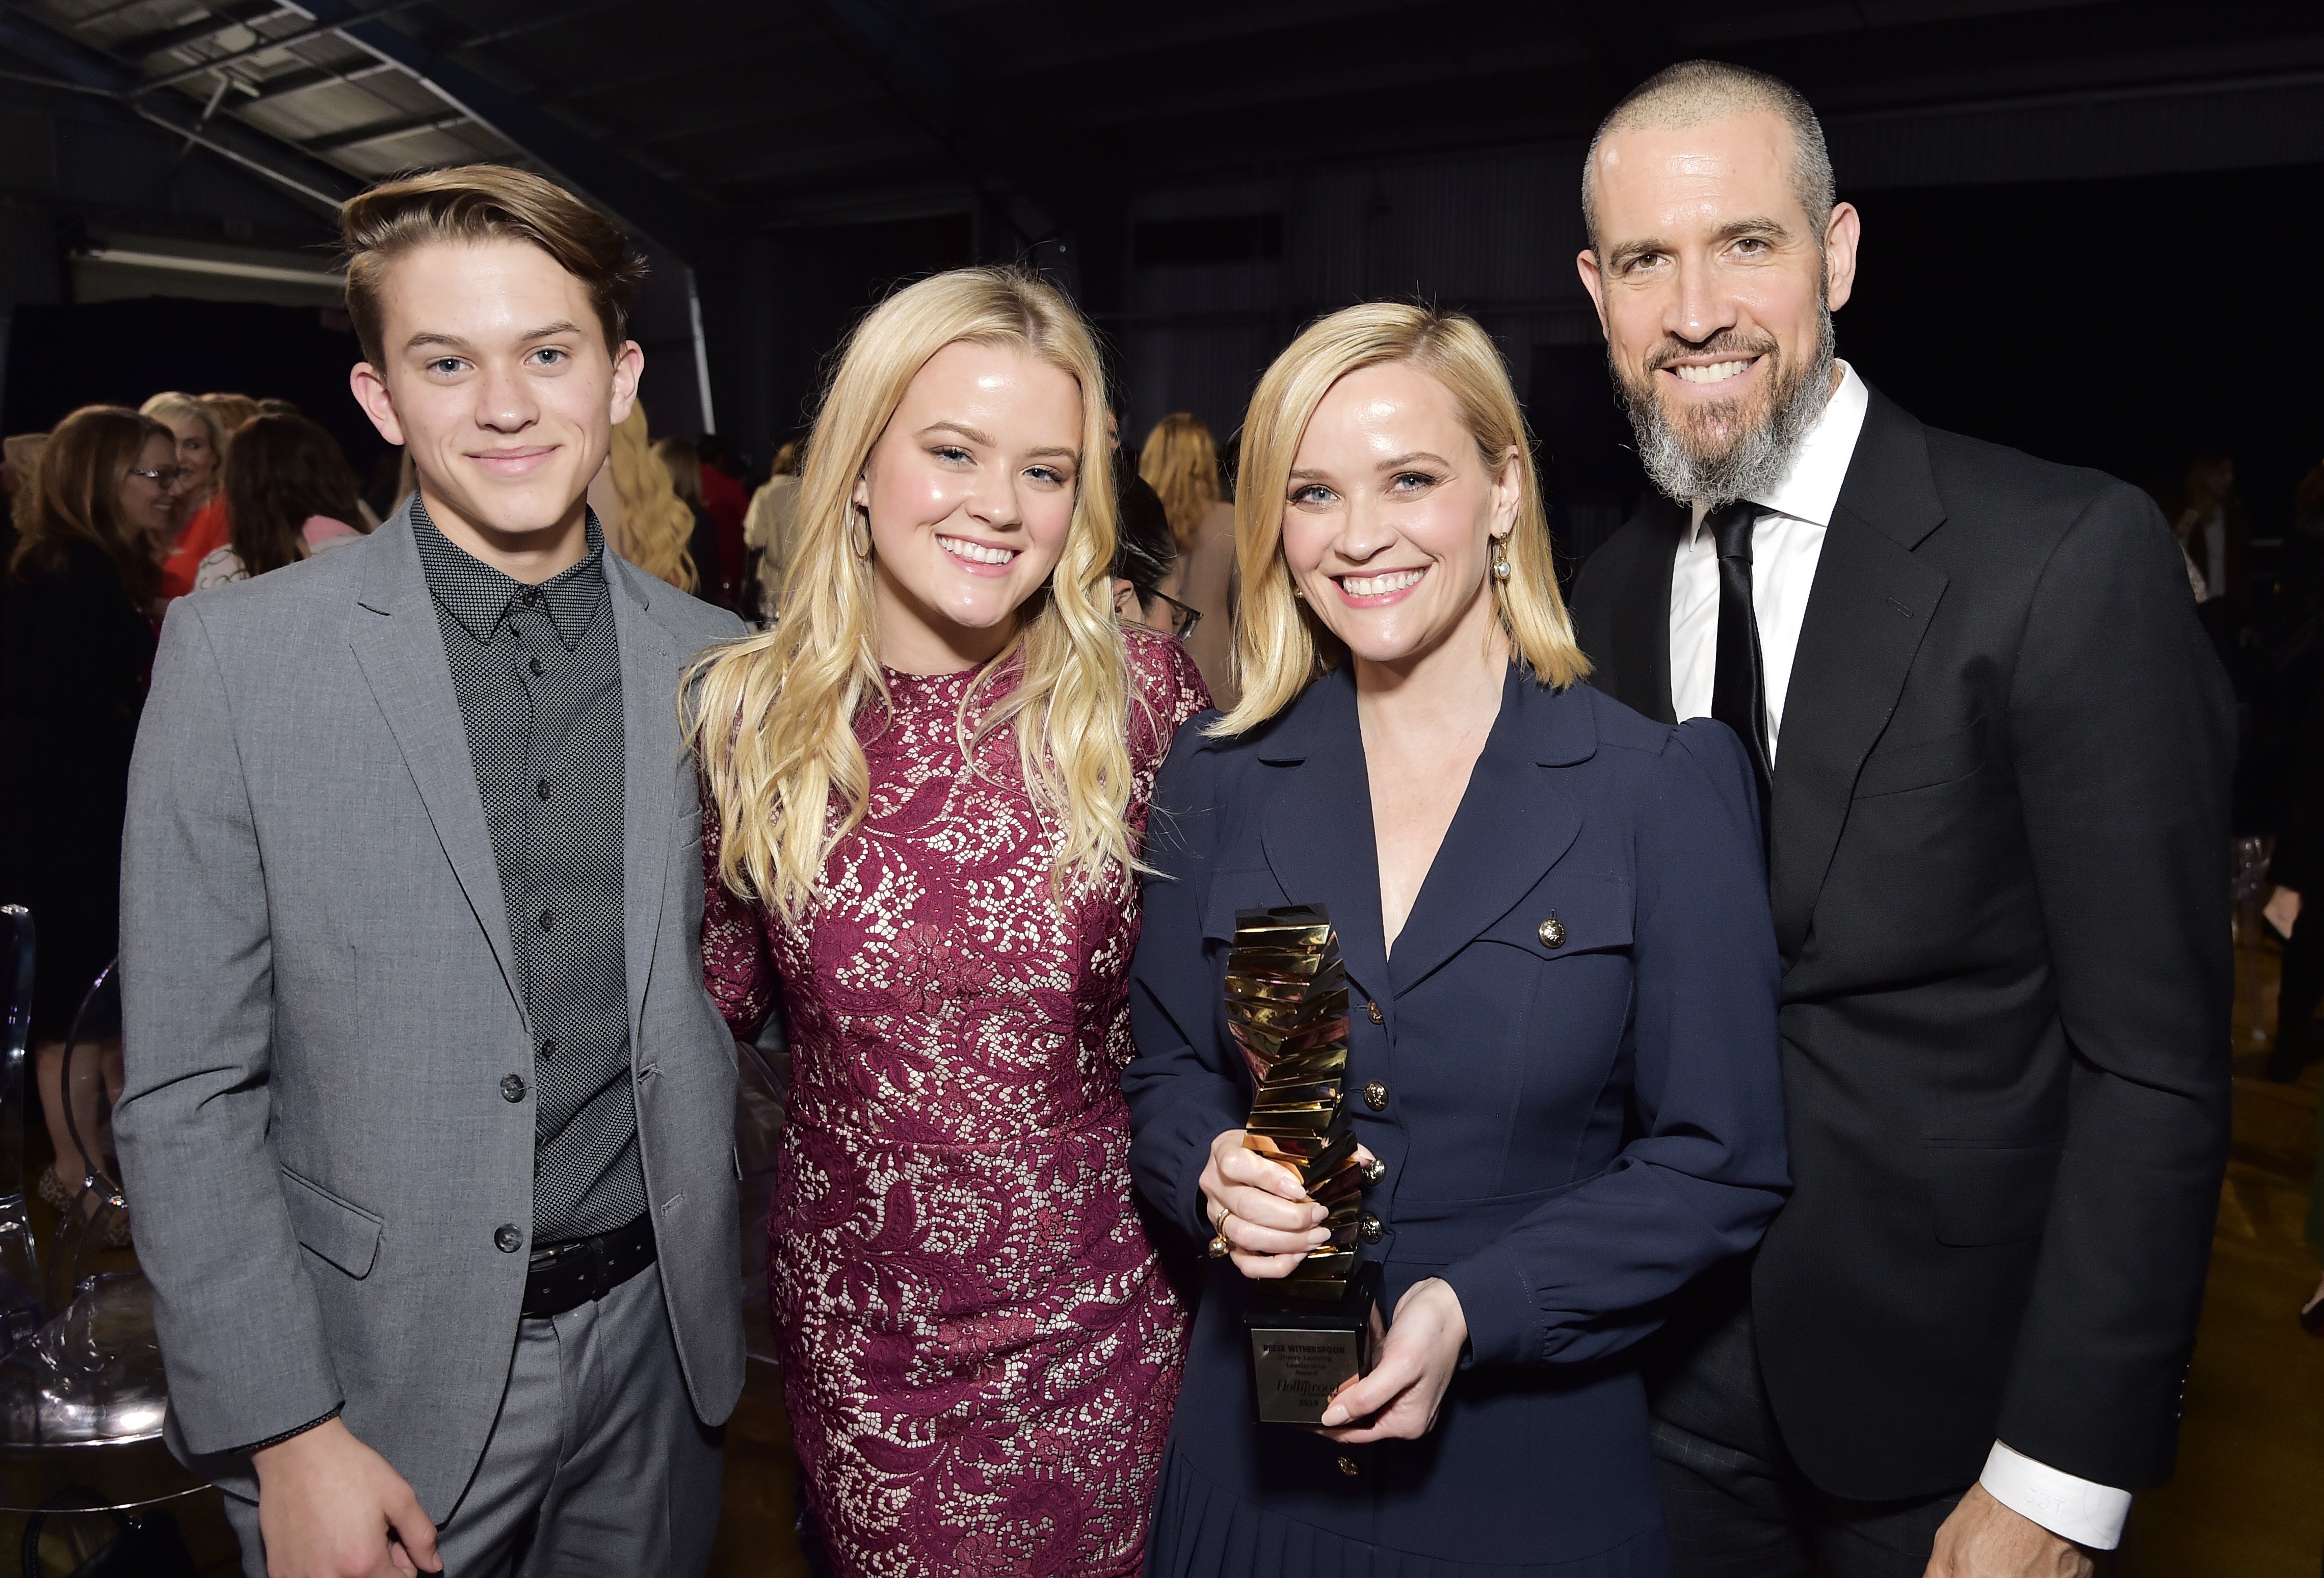 Left to Right are Deacon Phillippe, Ava Phillippe, Reese Witherspoon and Jim Toth, December, 2019. " Photo: Getty Images. 